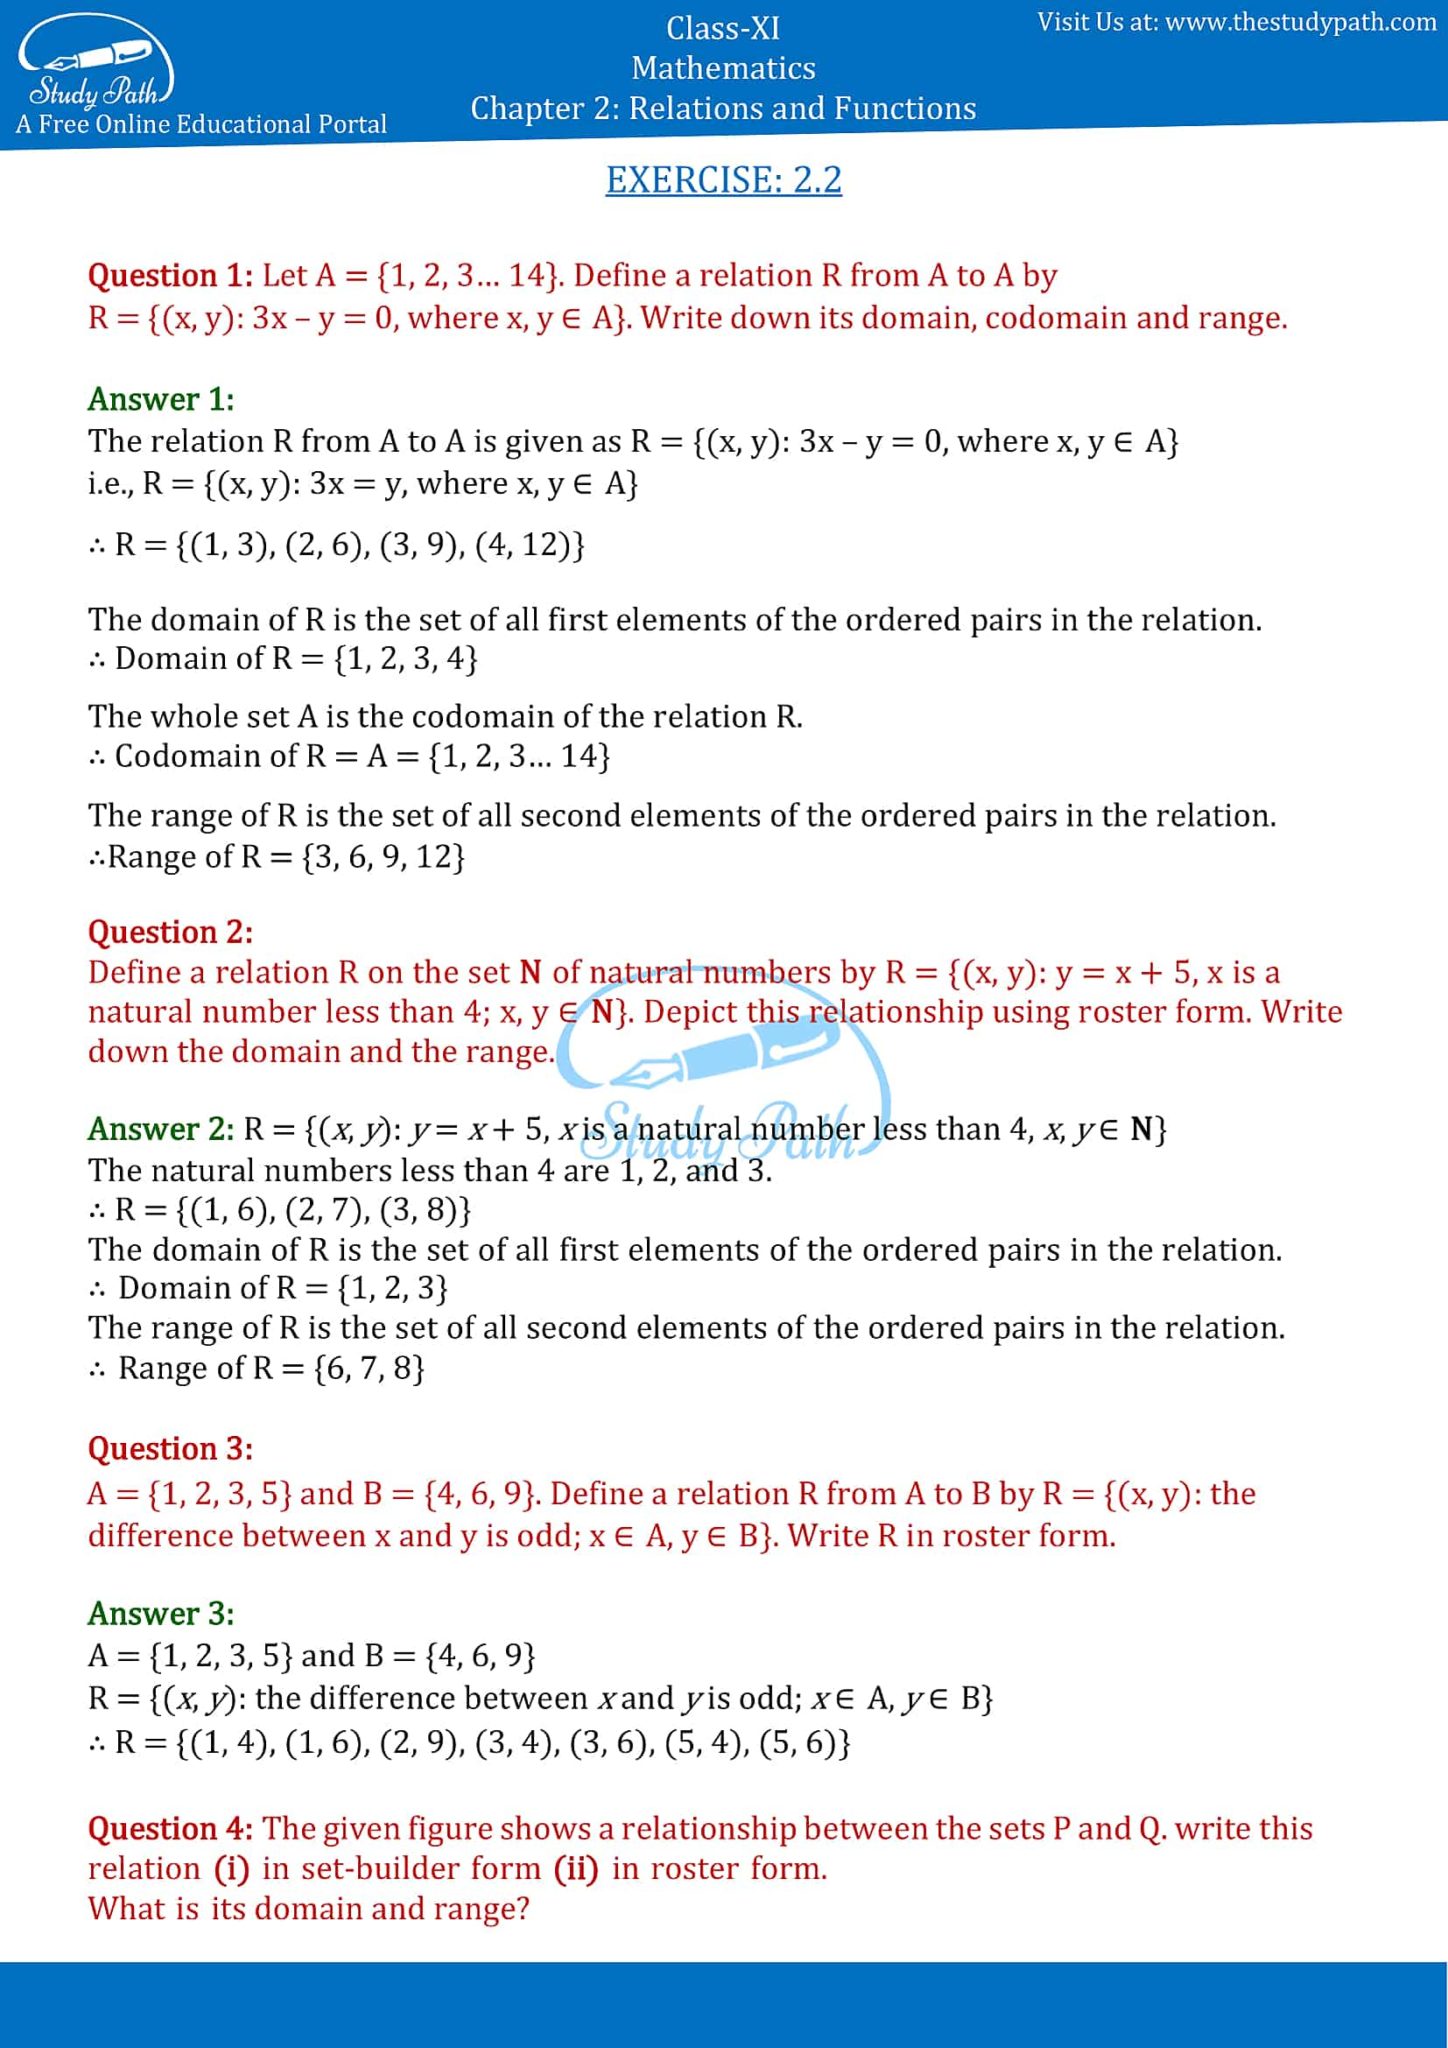 relations and functions class 11 exercise 2.2 solutions